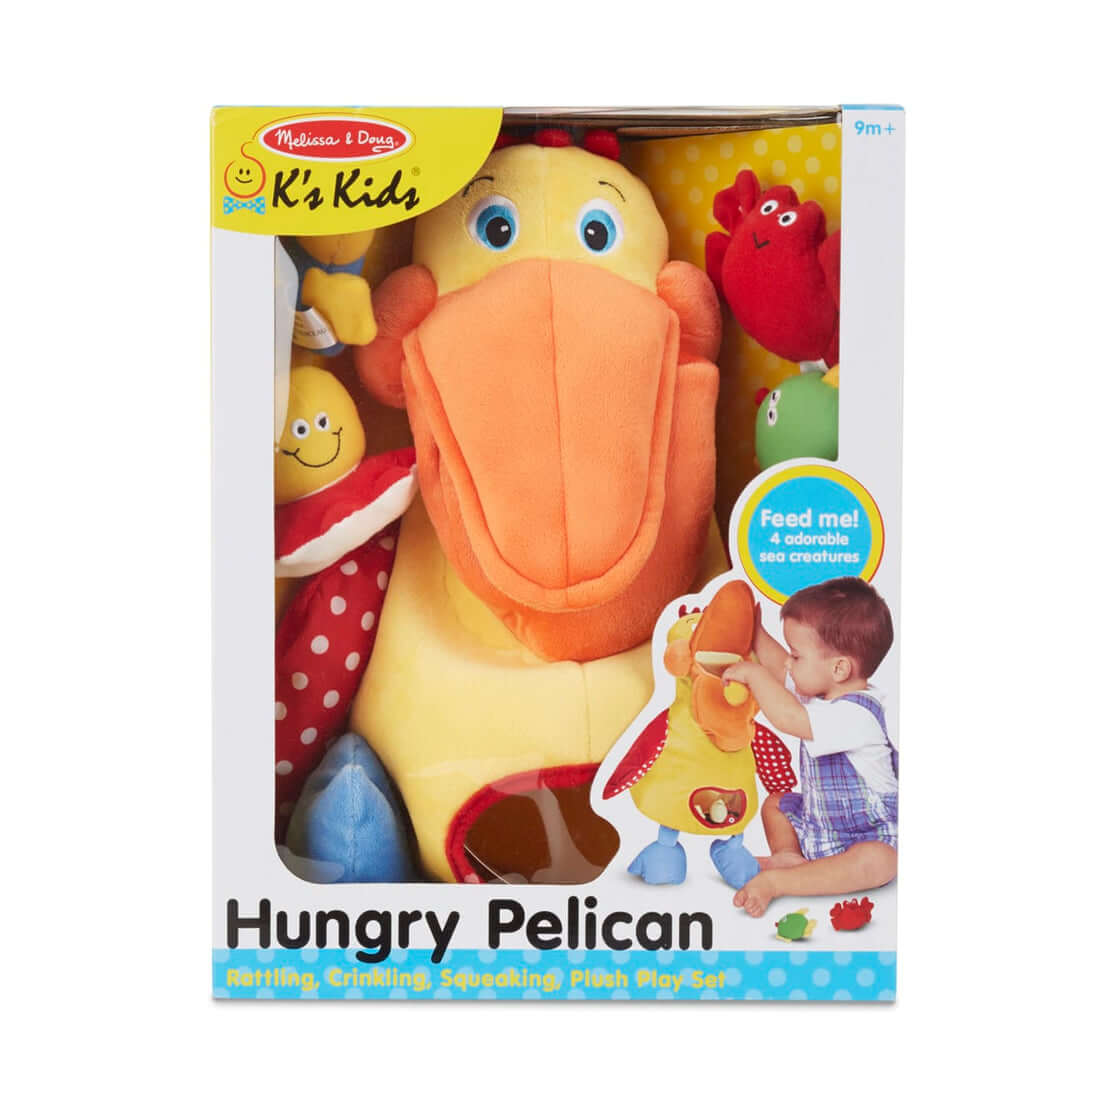 Melissa and Doug K's Kids Hungry Pelican Baby Toy